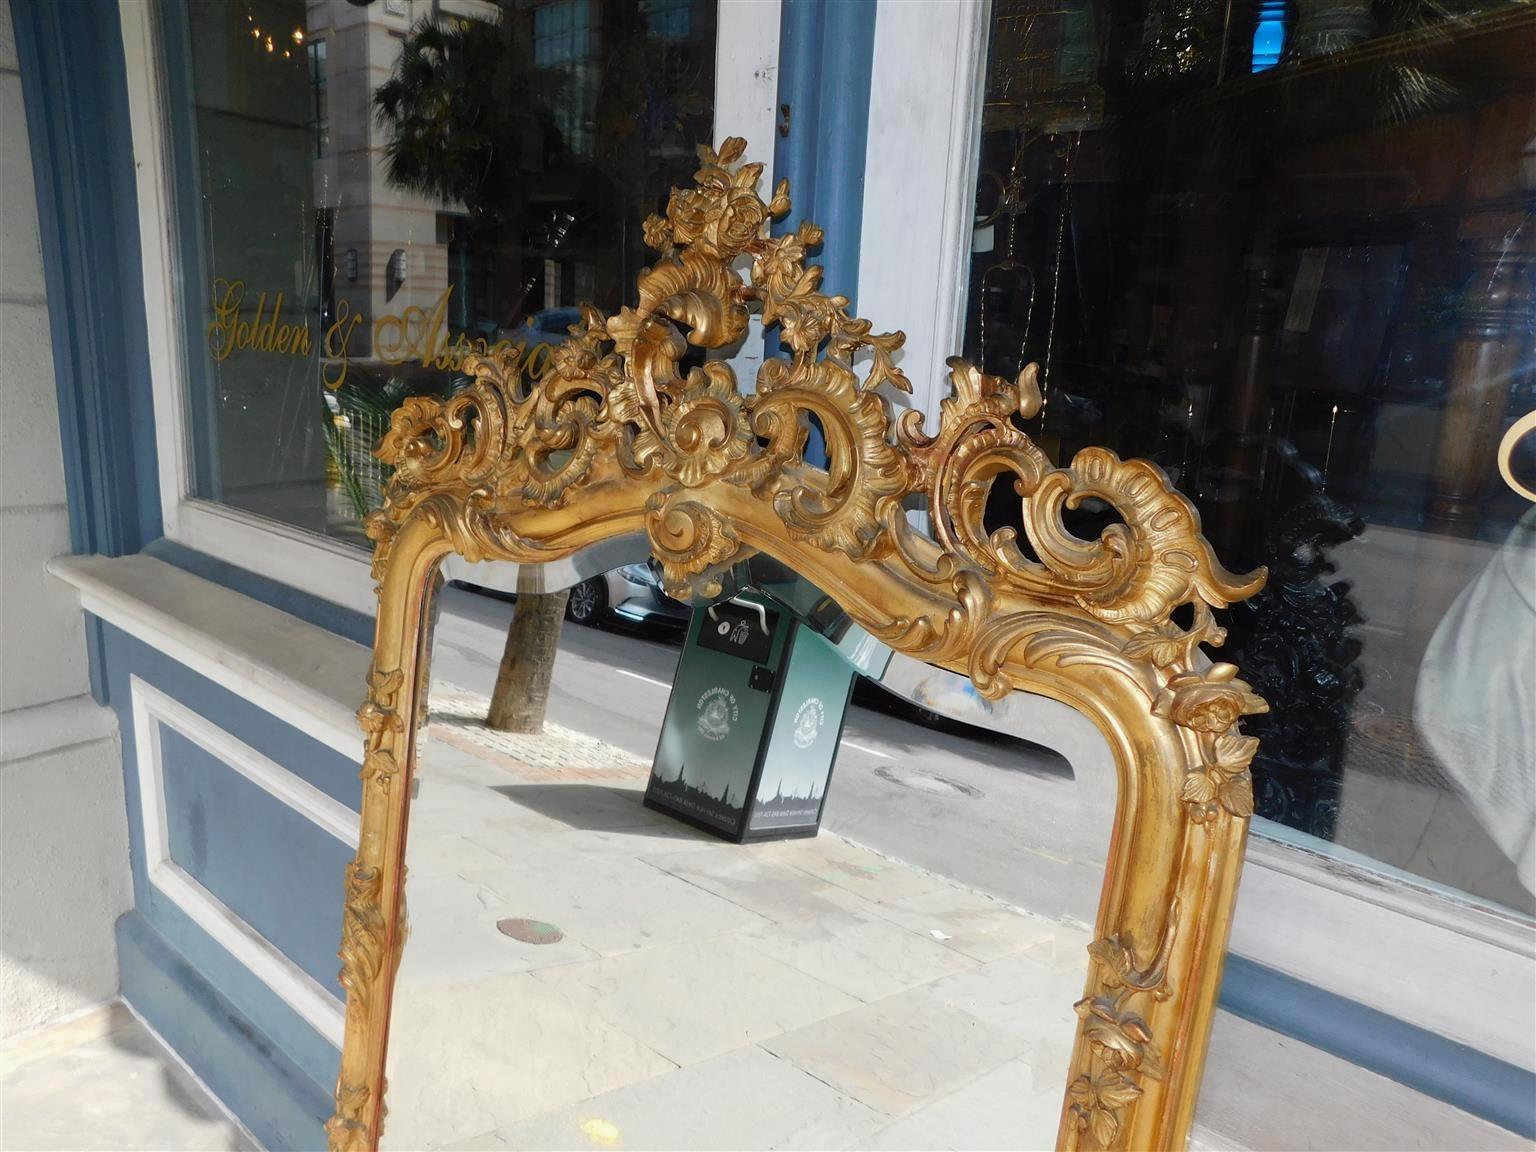 Hand-Carved French Gilt Carved Wood and Gesso Foliage Wall Mirror with Beveled Glass C. 1820